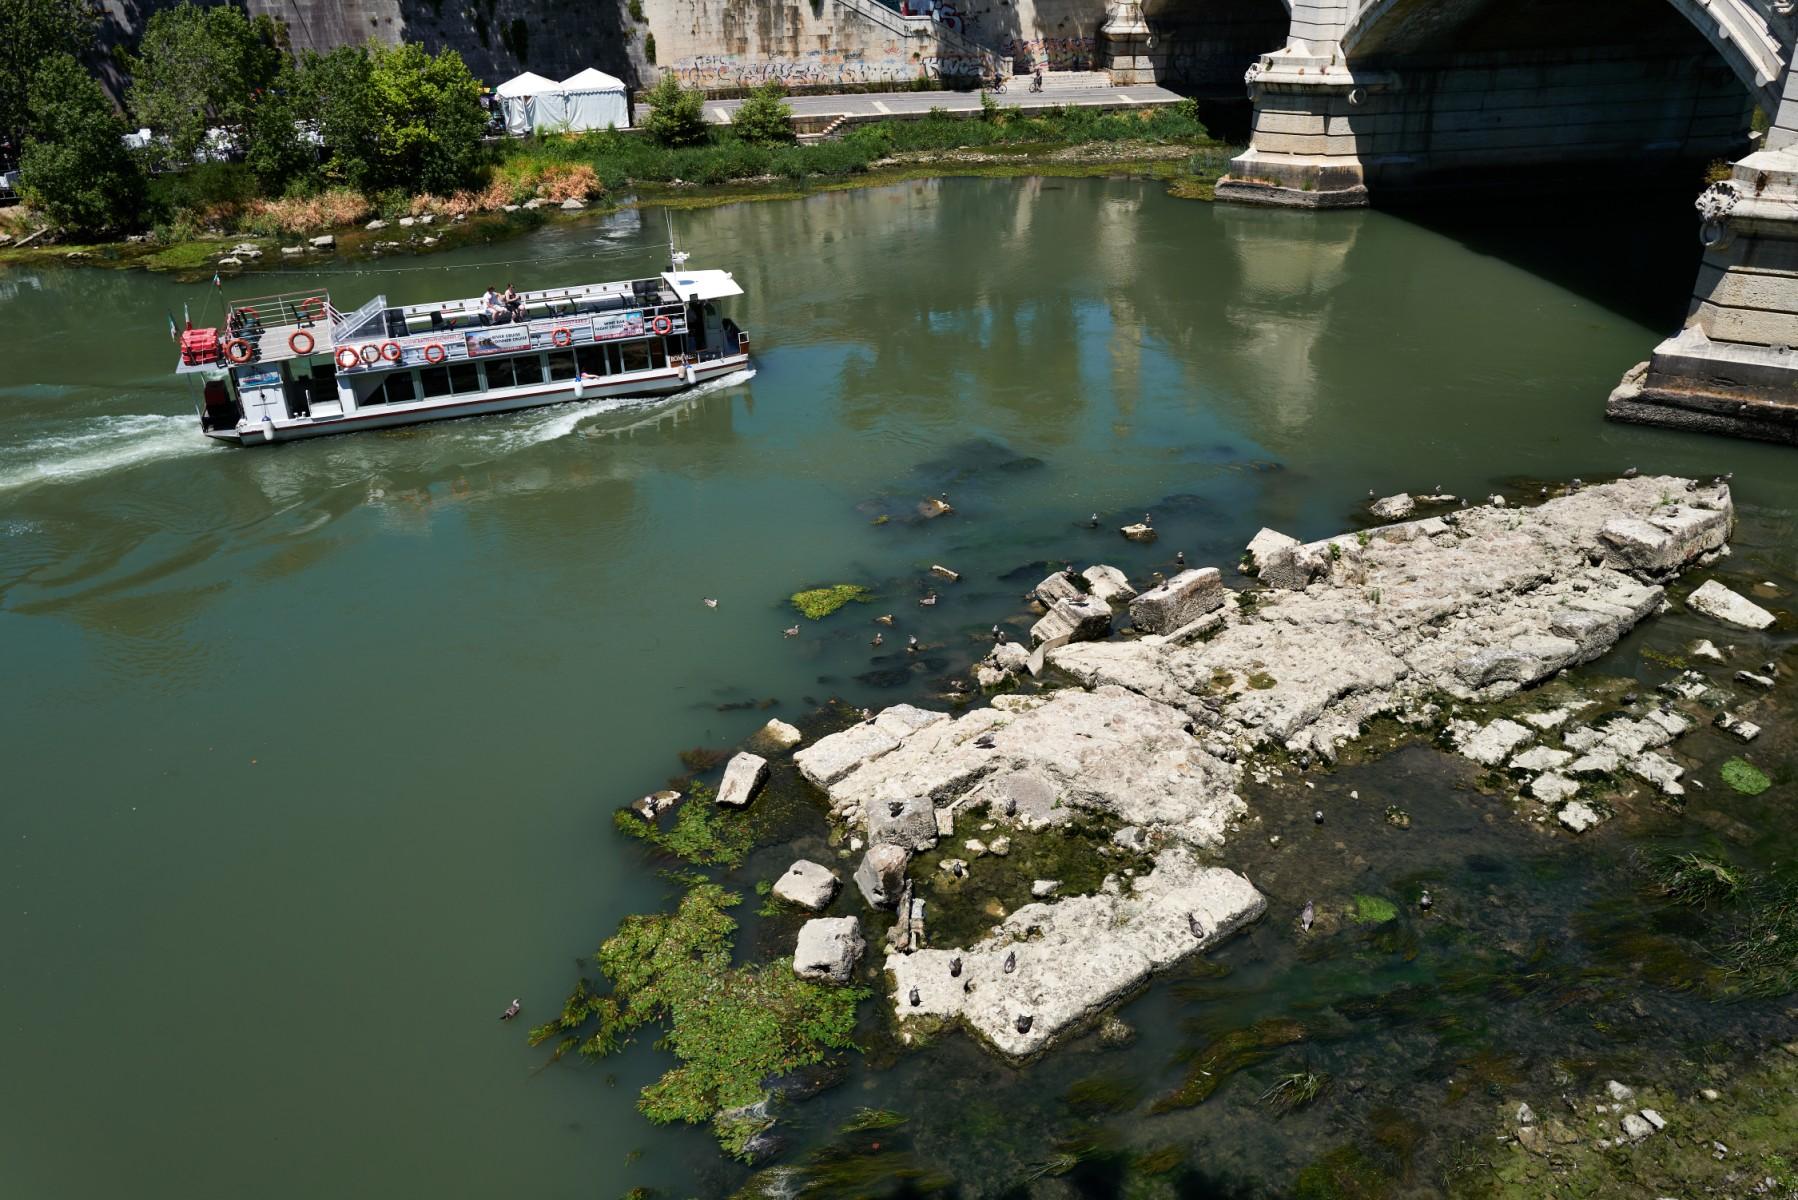 This picture taken on July 2 in Rome shows a tourist river boat sailing near the Vittorio Emanuele II bridge, as the low water level of the river Tiber reveals an ancient bridge built under Roman Emperor Nero. Photo: AFP